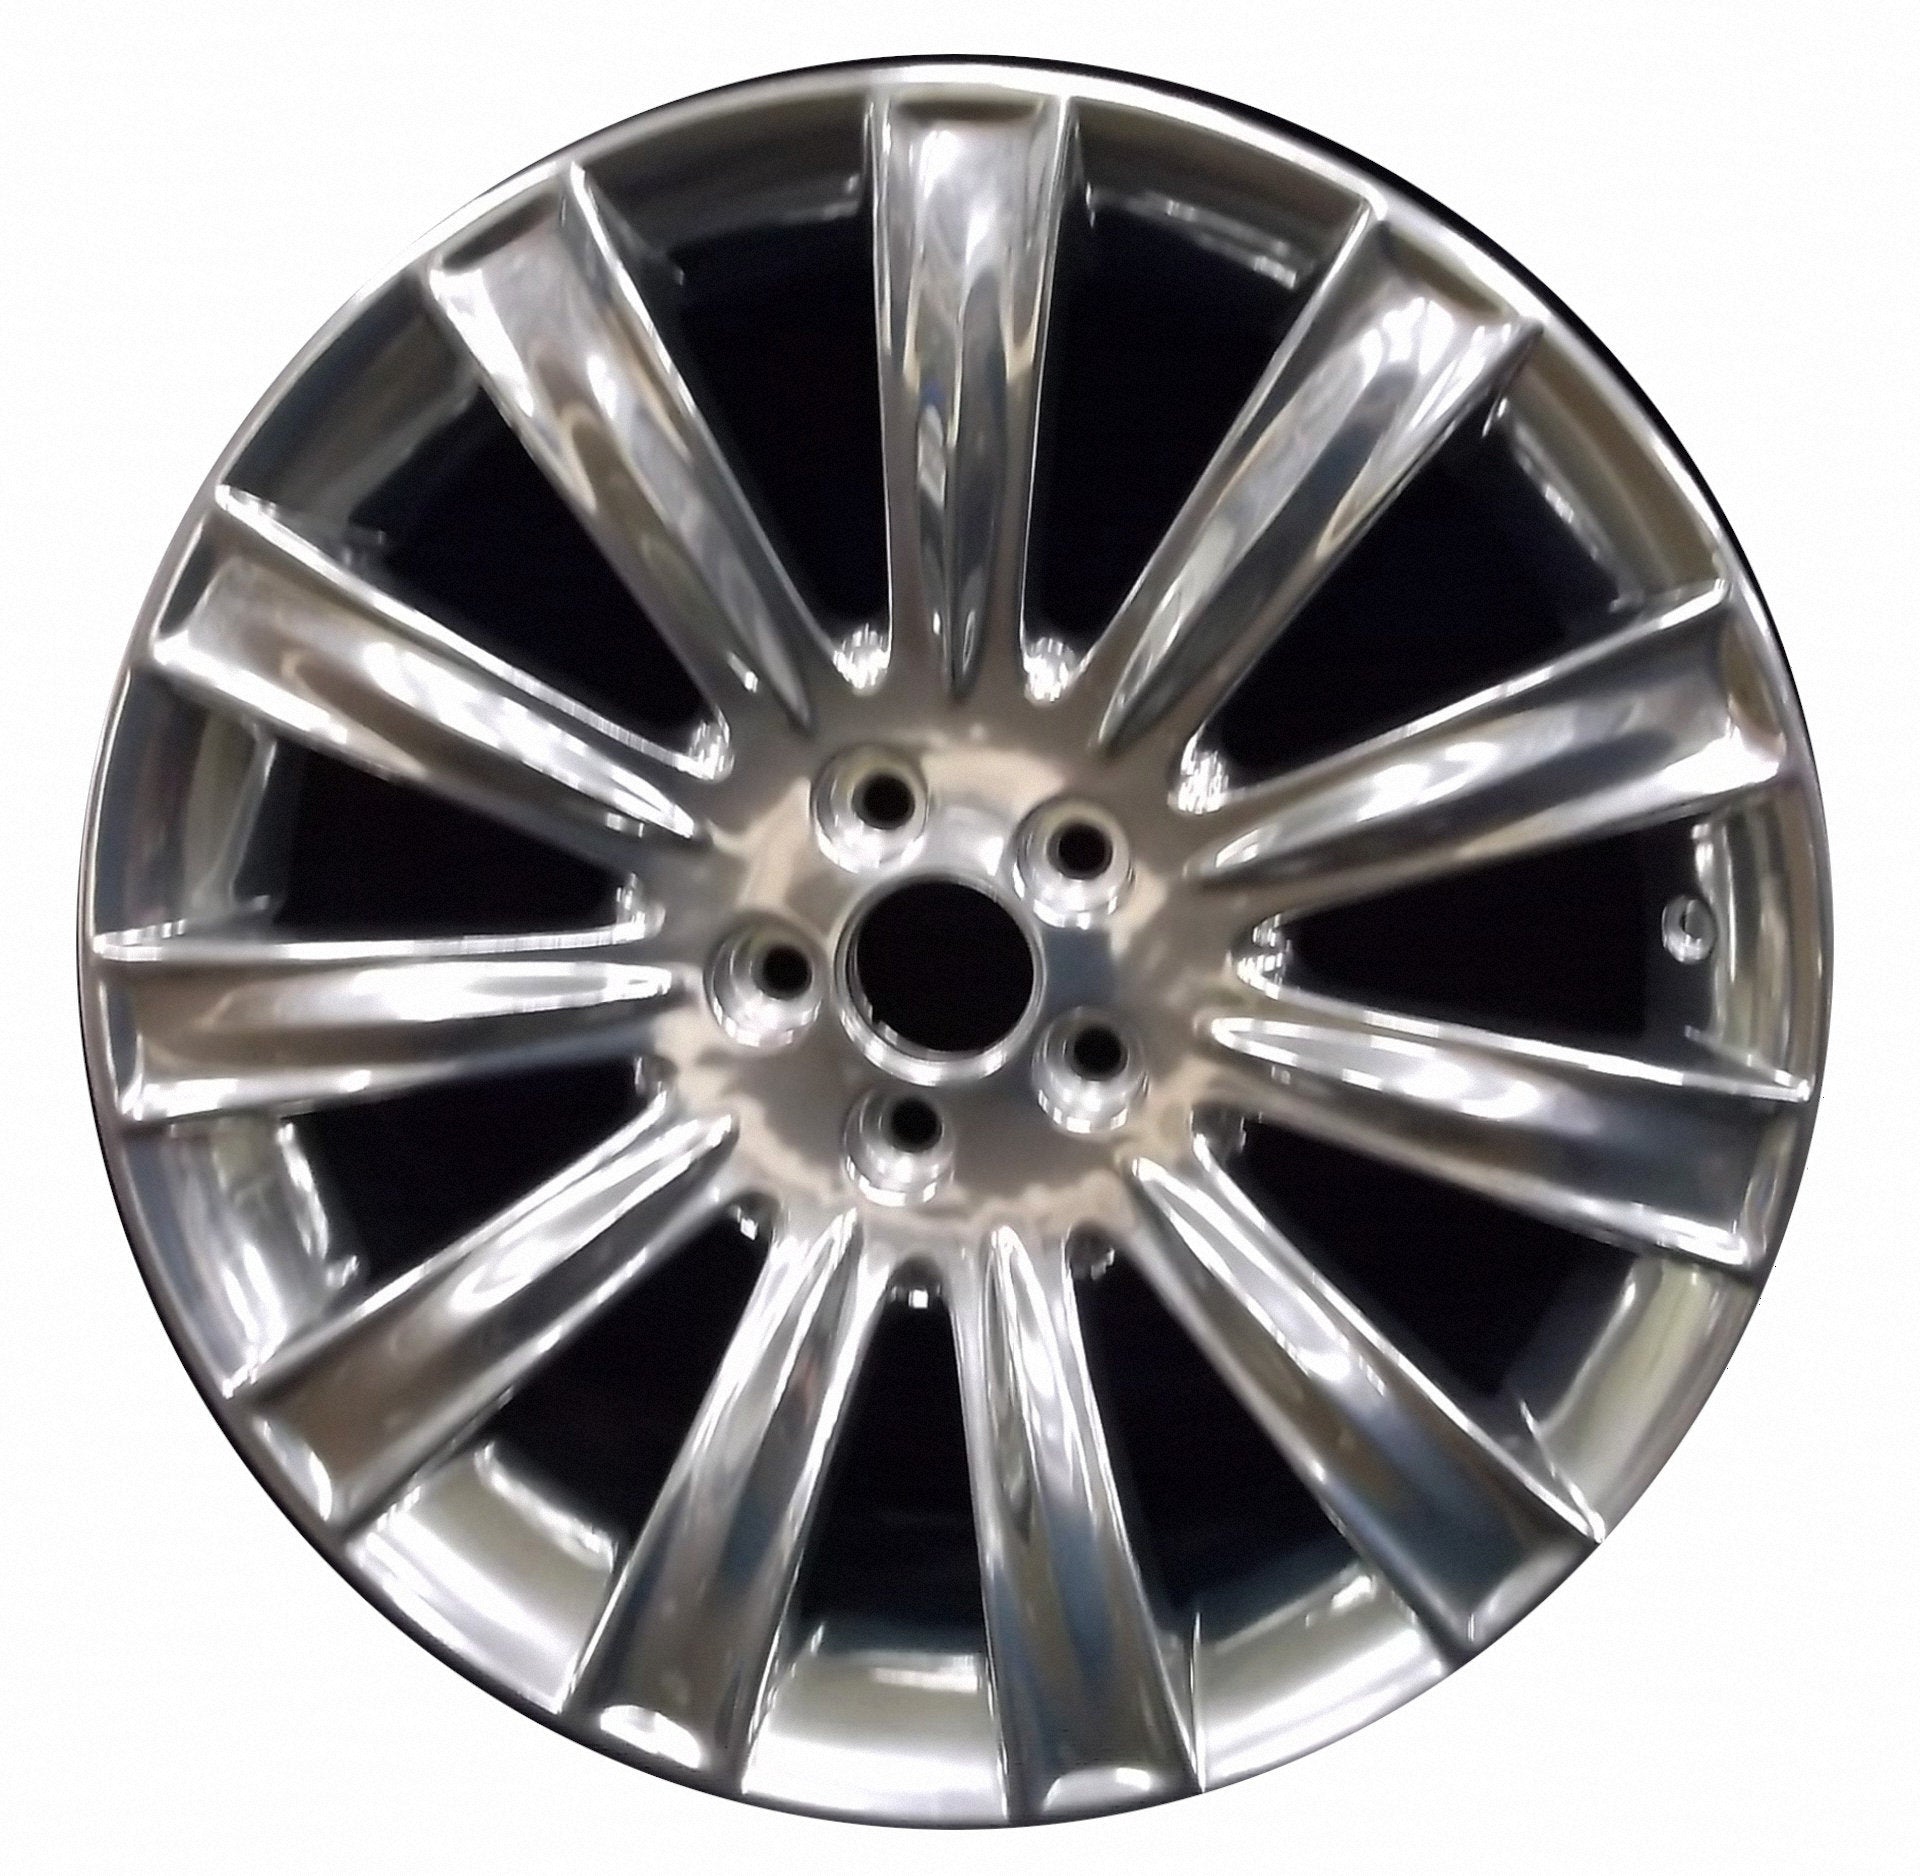 Lincoln MKX  2011, 2012, 2013, 2014, 2015 Factory OEM Car Wheel Size 20x8.5 Alloy WAO.3854.FULL.POL